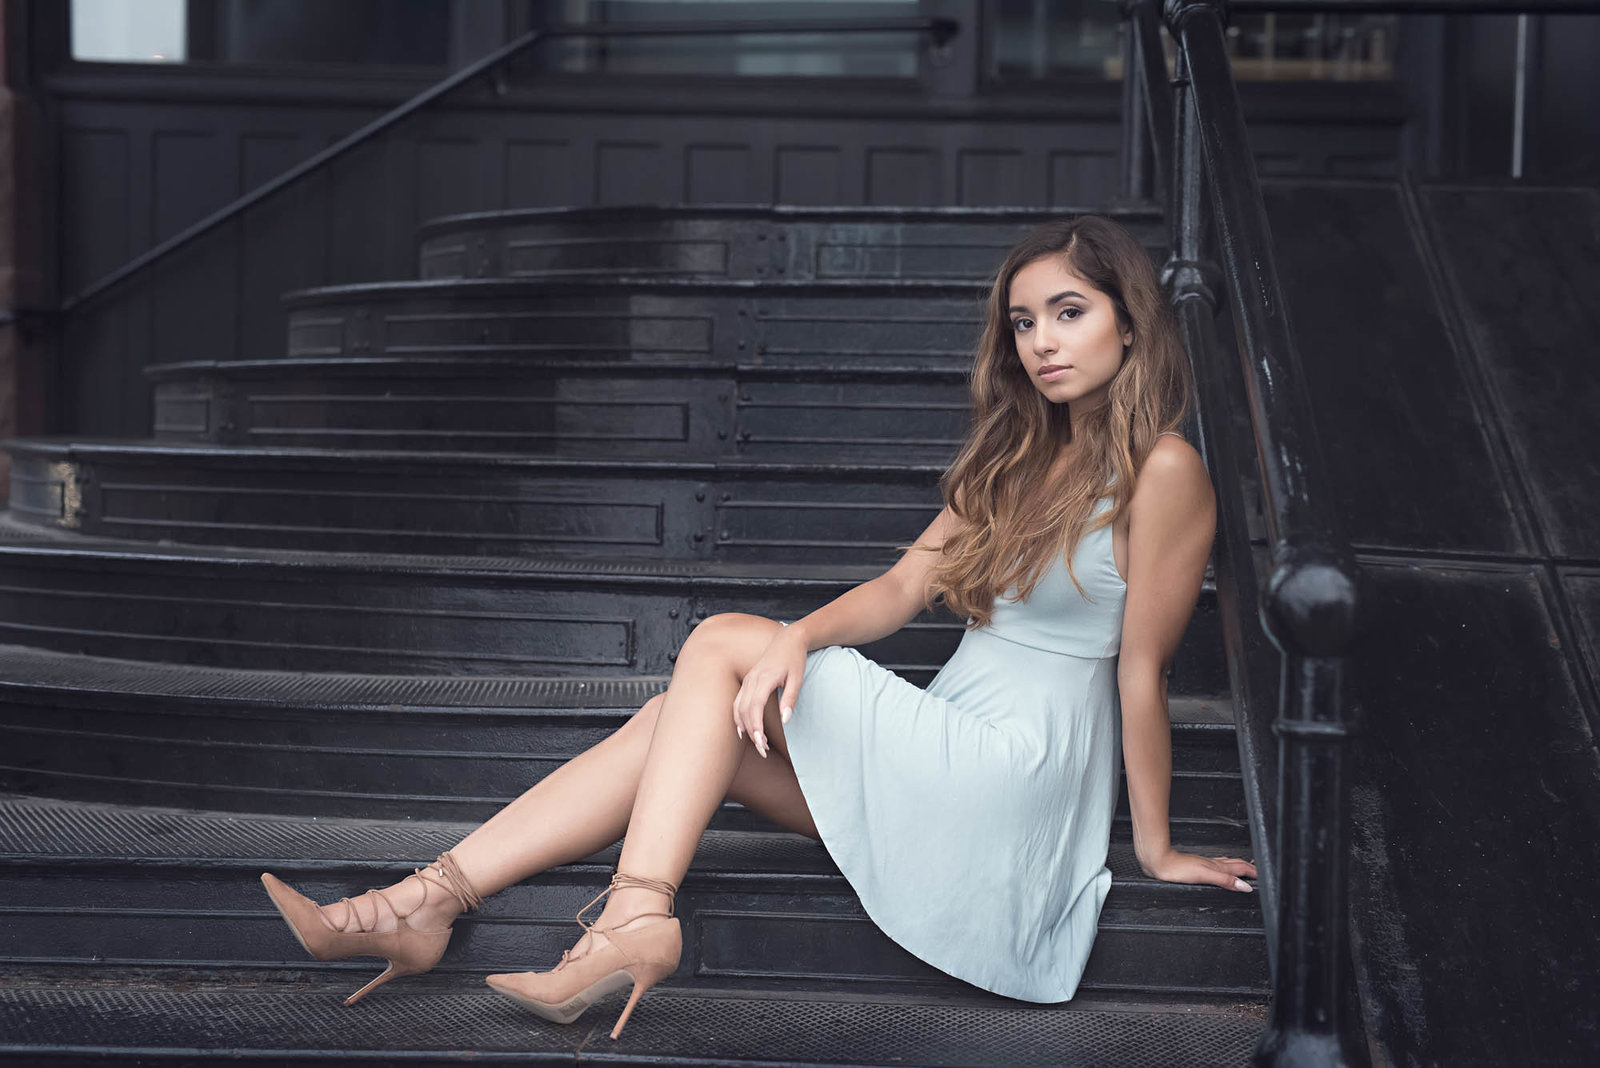 Glamorous senior pictures on steps latina Midwest